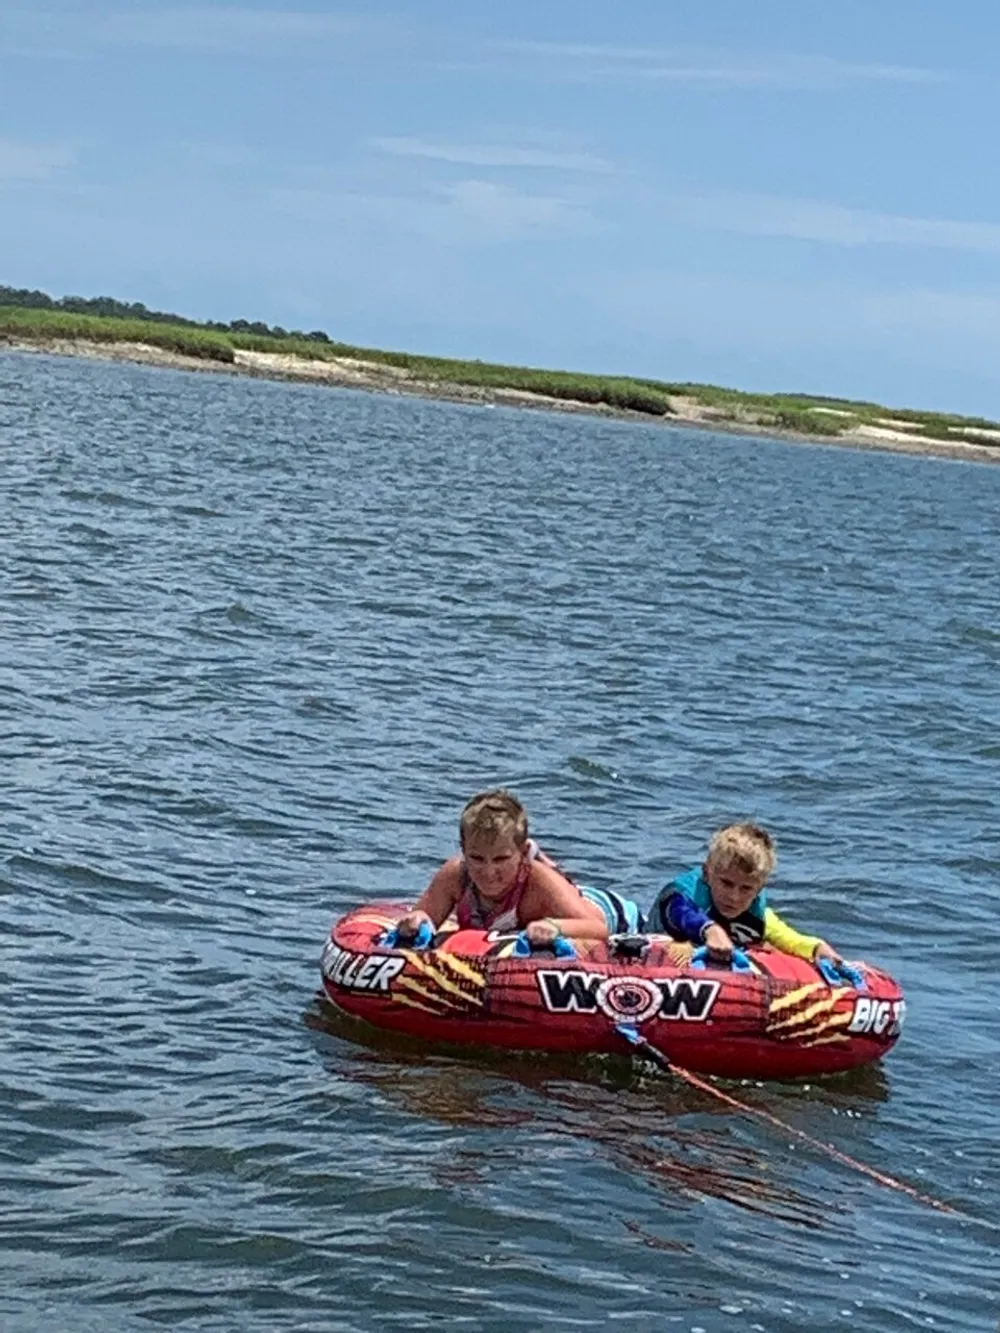 Two children are sitting on an inflatable water tube on a calm body of water with a sandy shore in the background